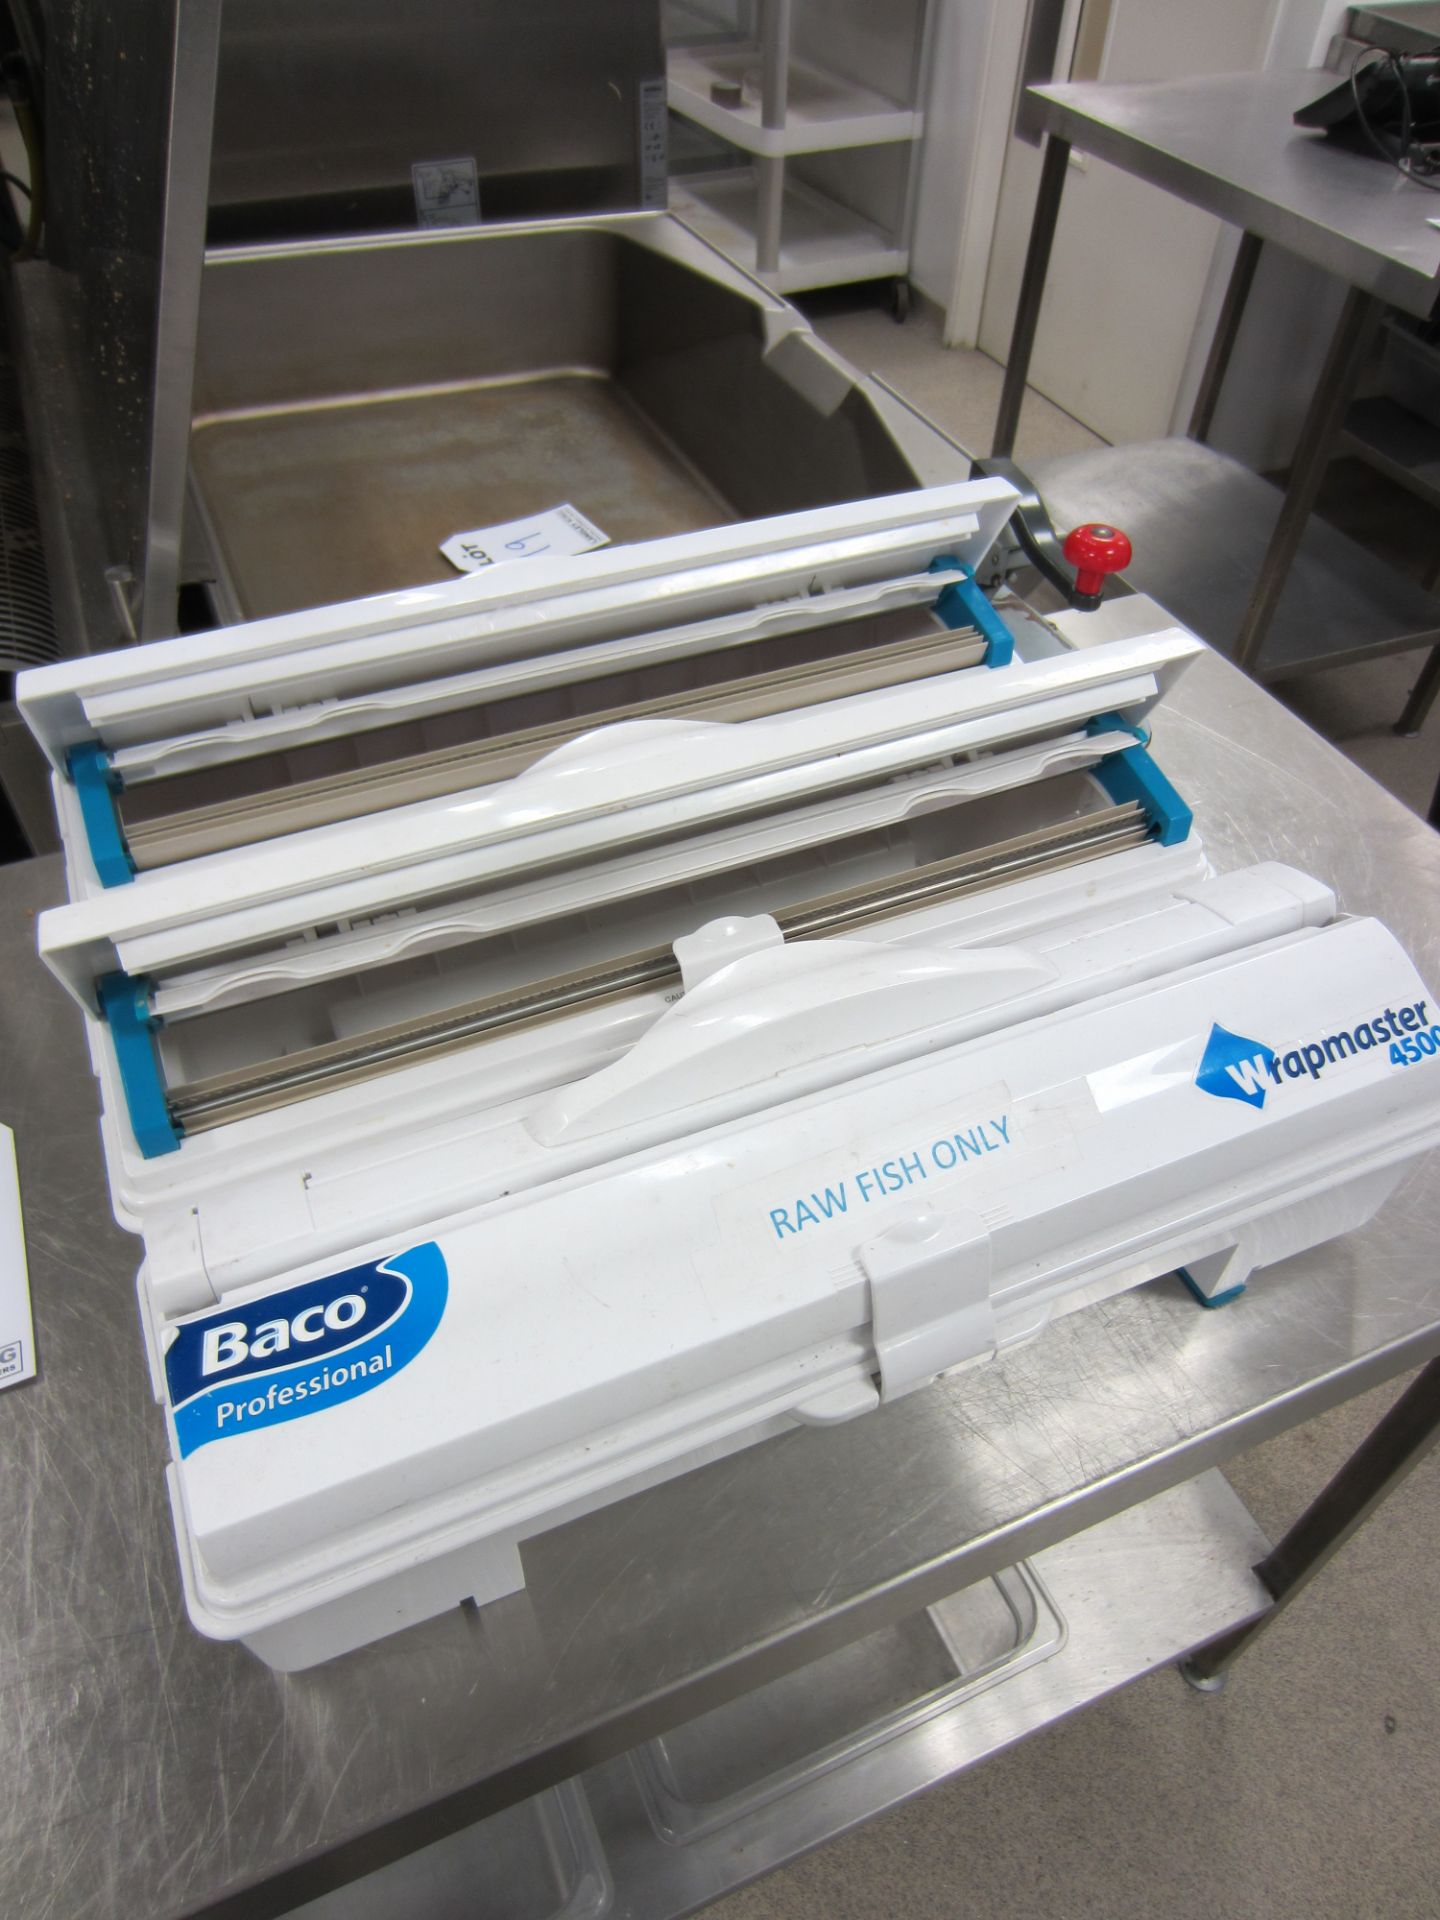 8 Baco Wrapmaster 3000/4508 Cling Film / Foil / Paper Dispensers - Image 2 of 2